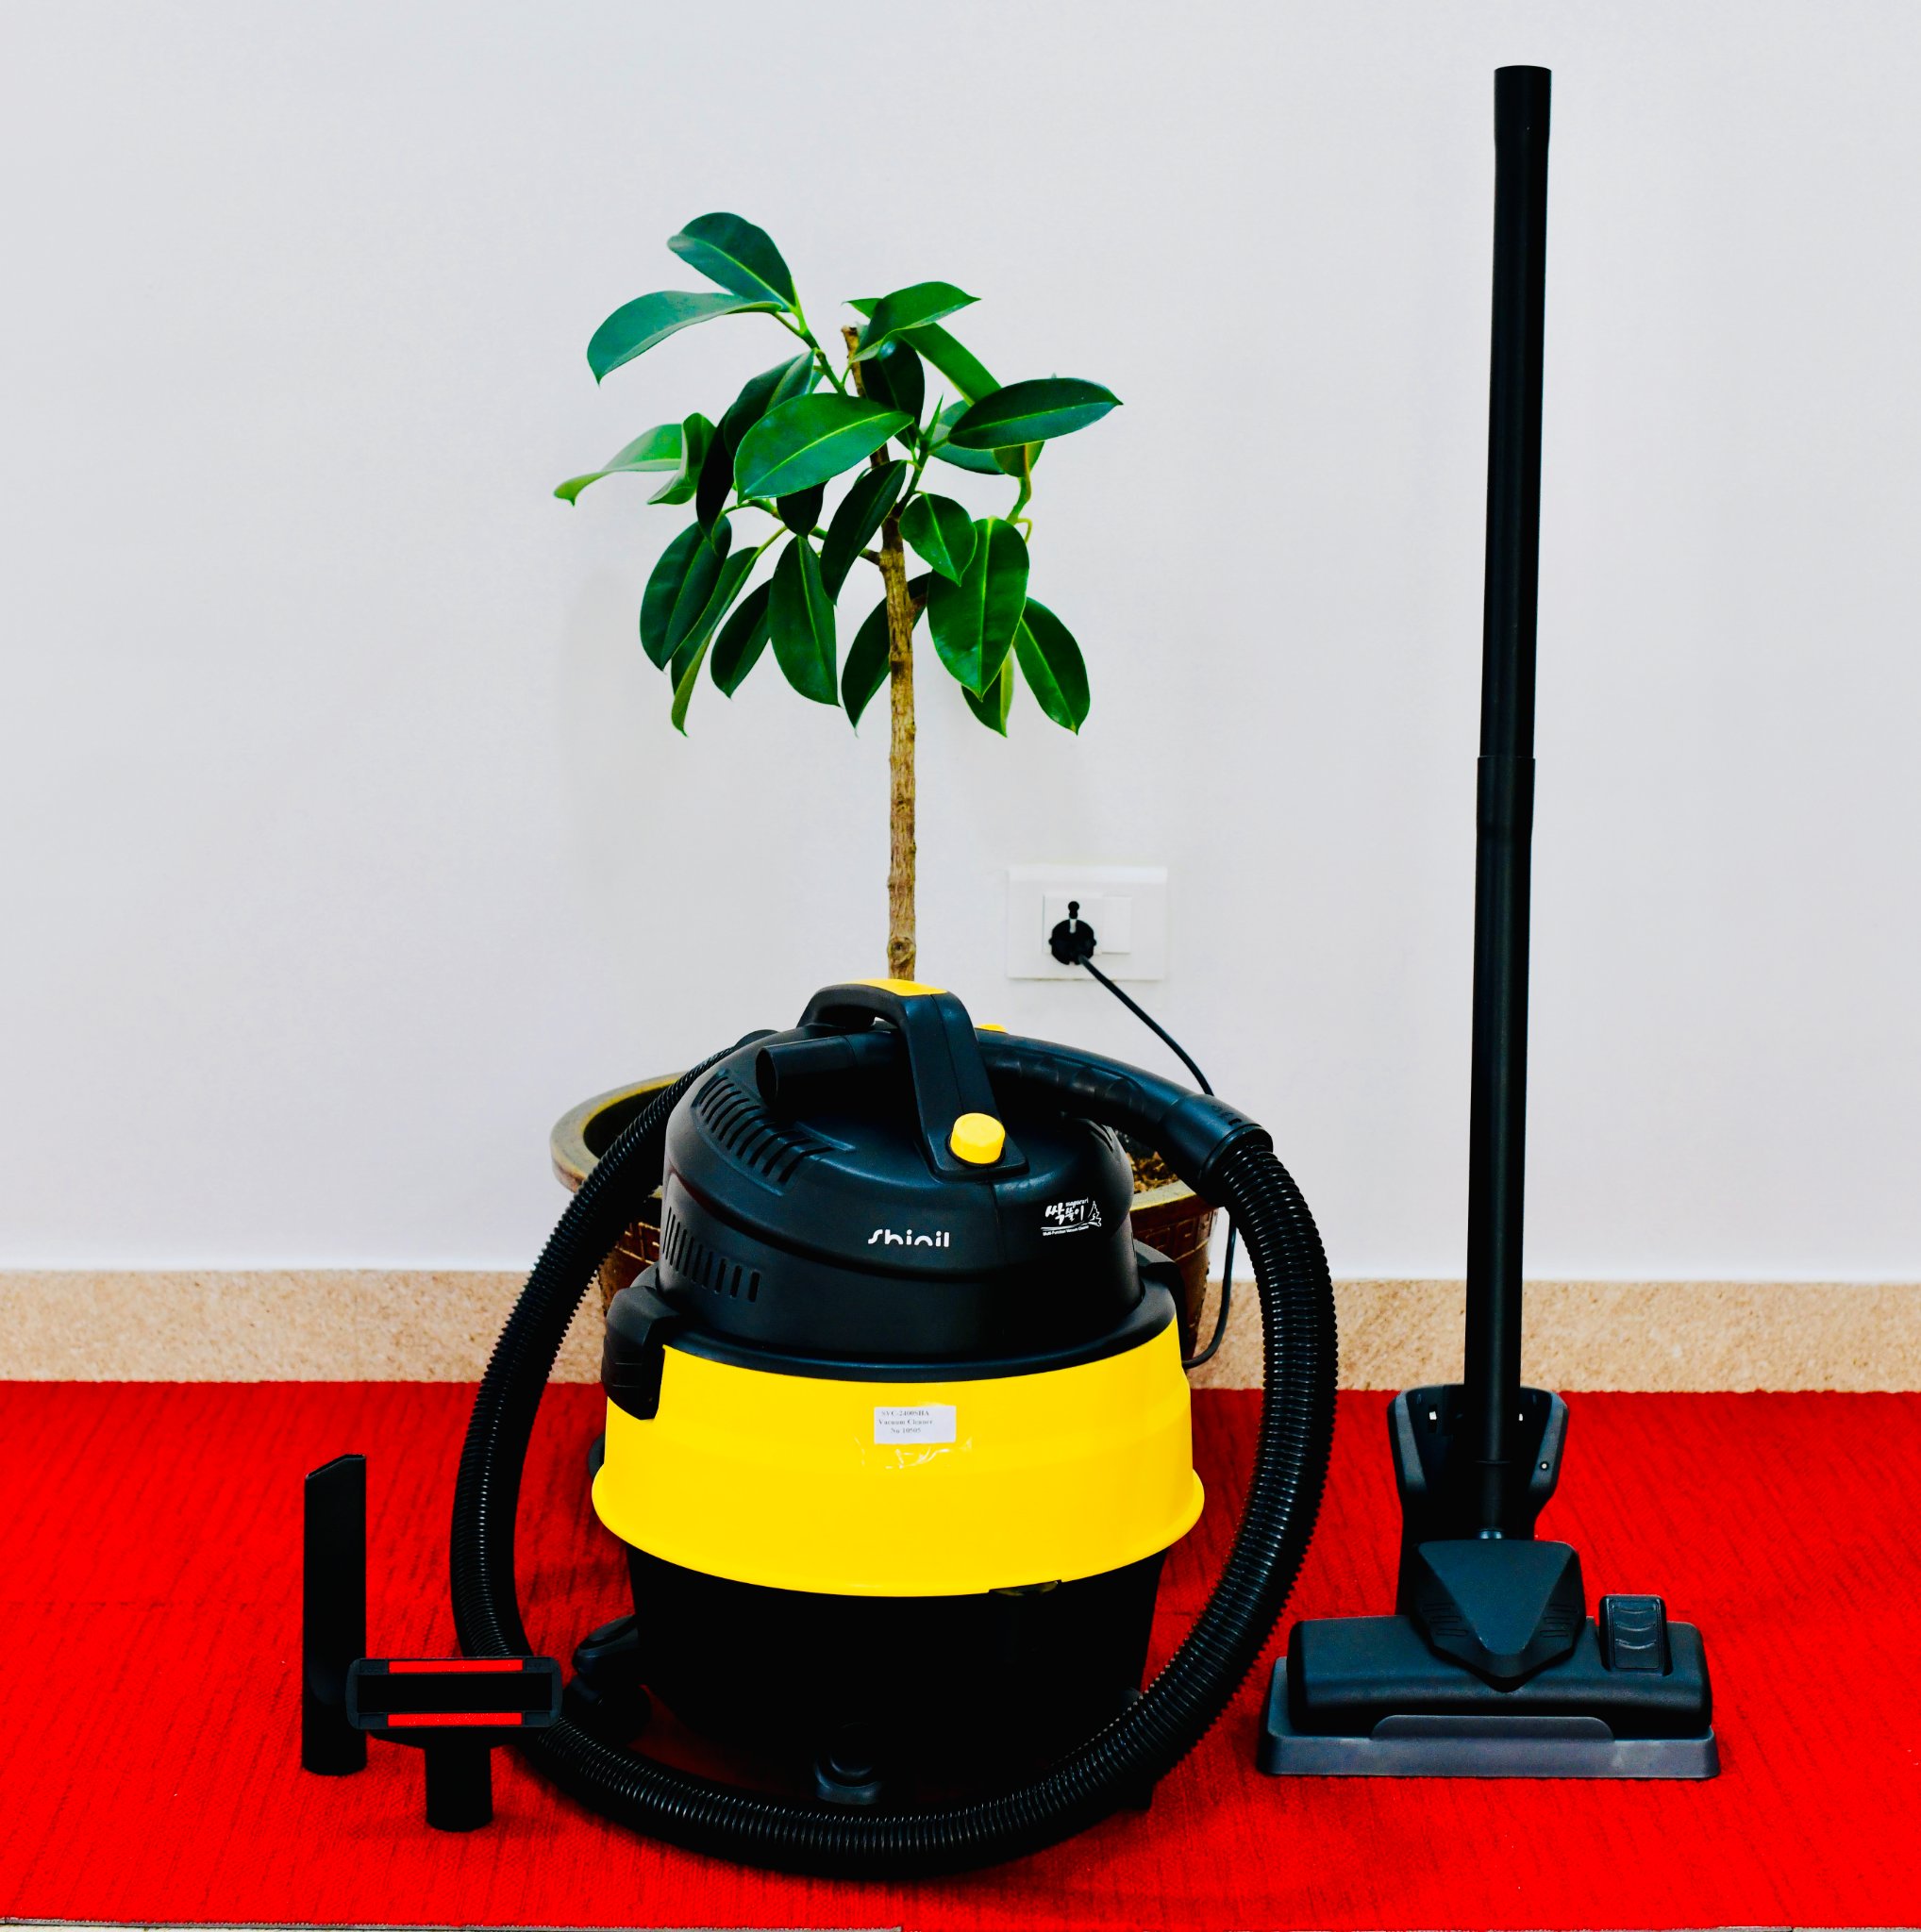 Shinil Wet And Dry Vacuum Cleaner - SVC-2400SHA